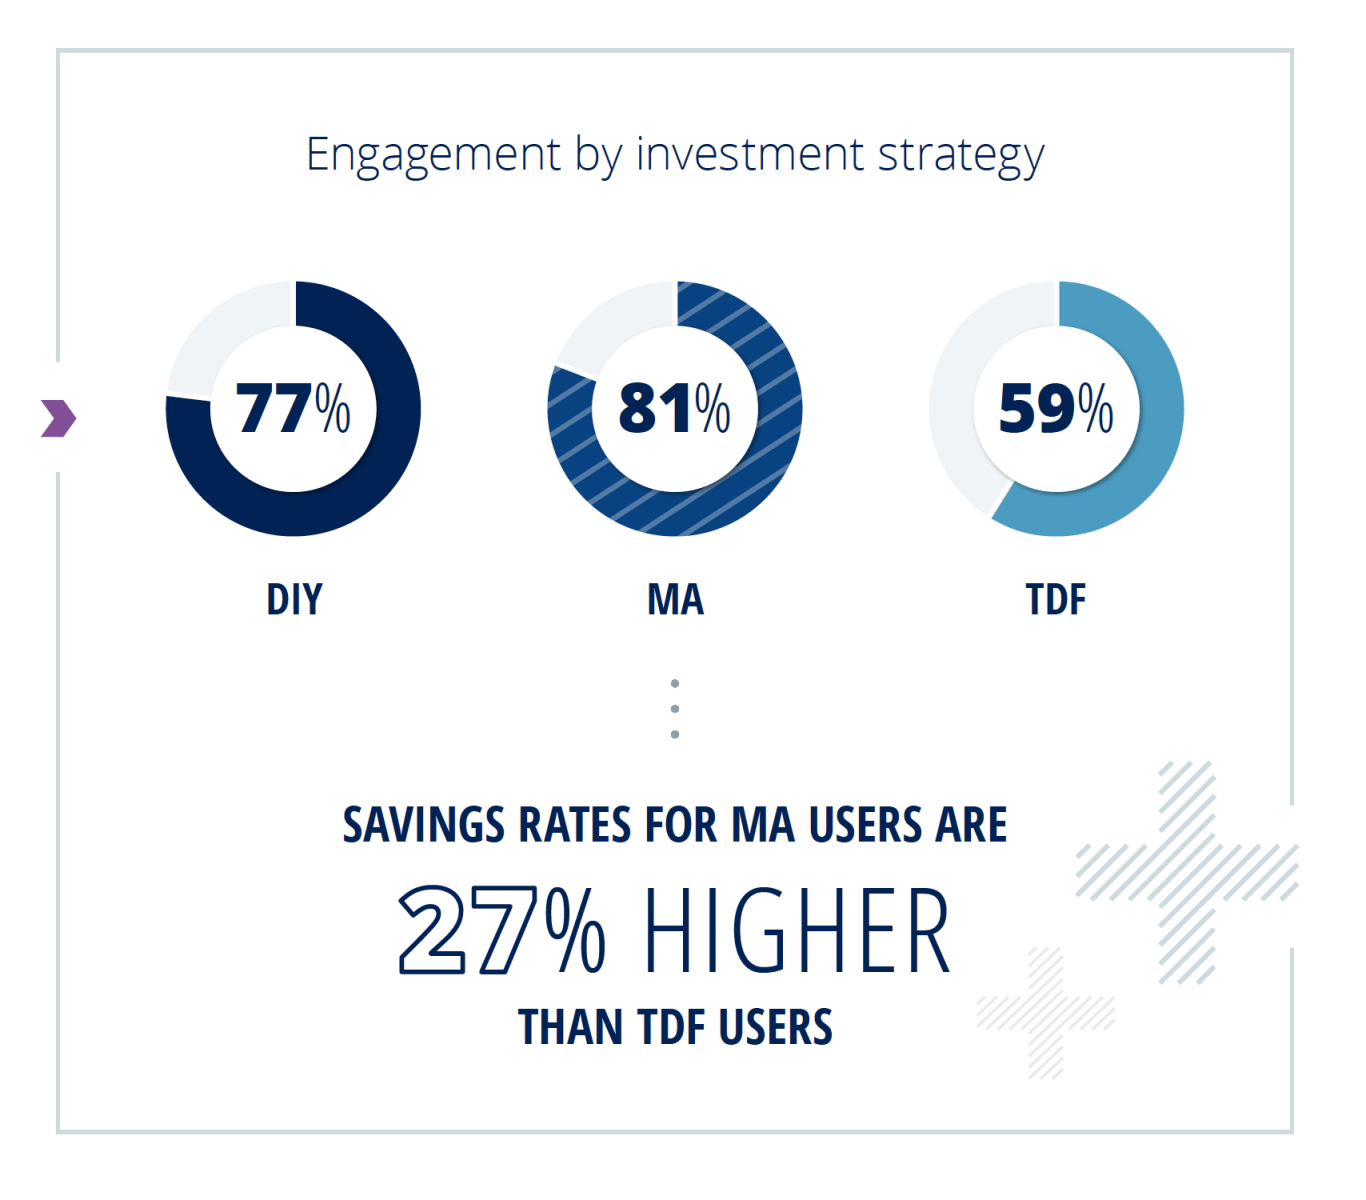 Chart showing engagement by investment strategy. 77% DIY, 81% MA, 59% TDF